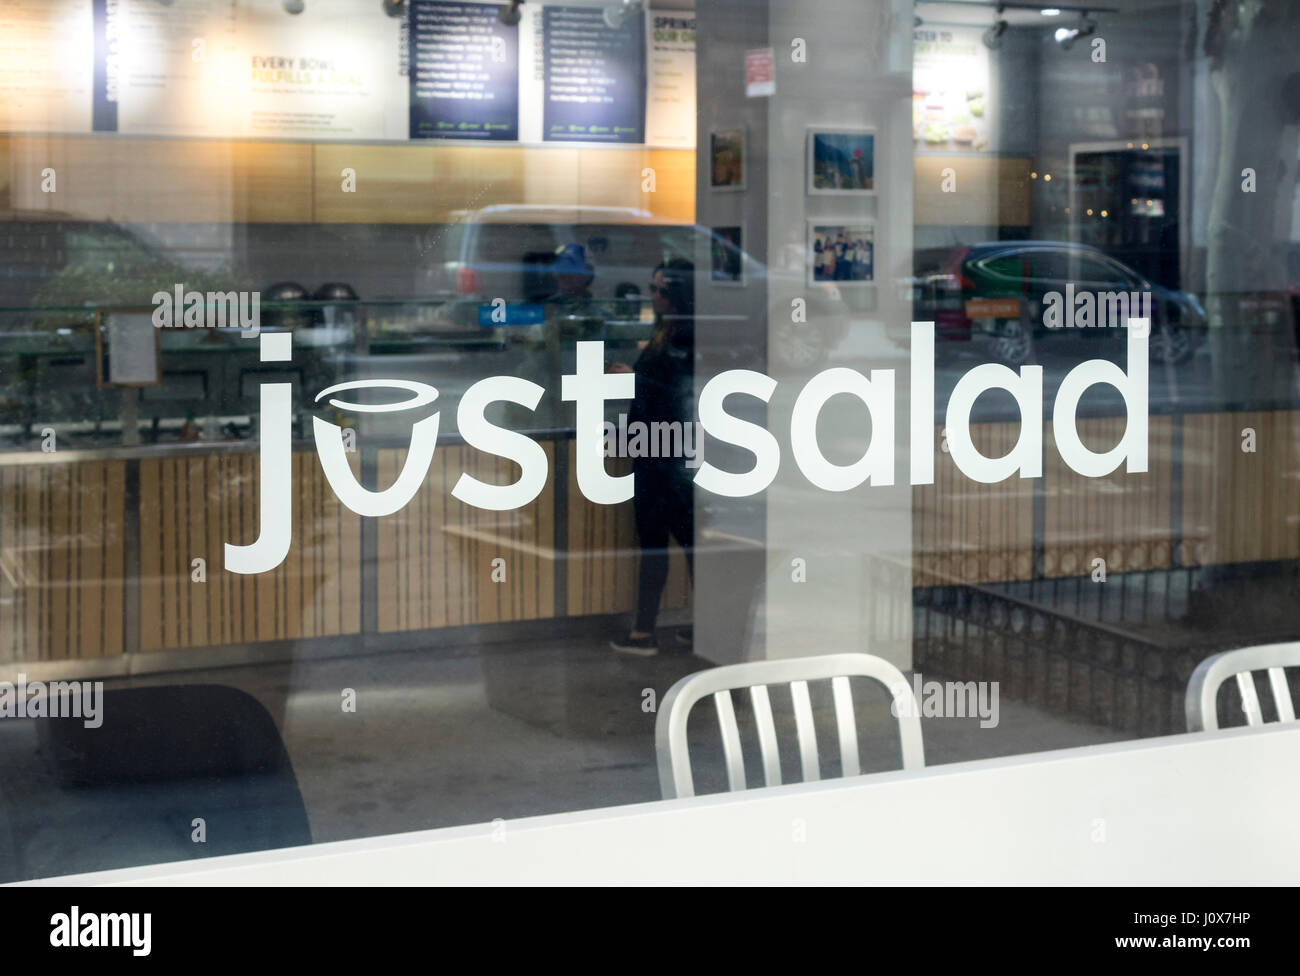 Just Salad, a take away theme restaurant in New York City Stock Photo